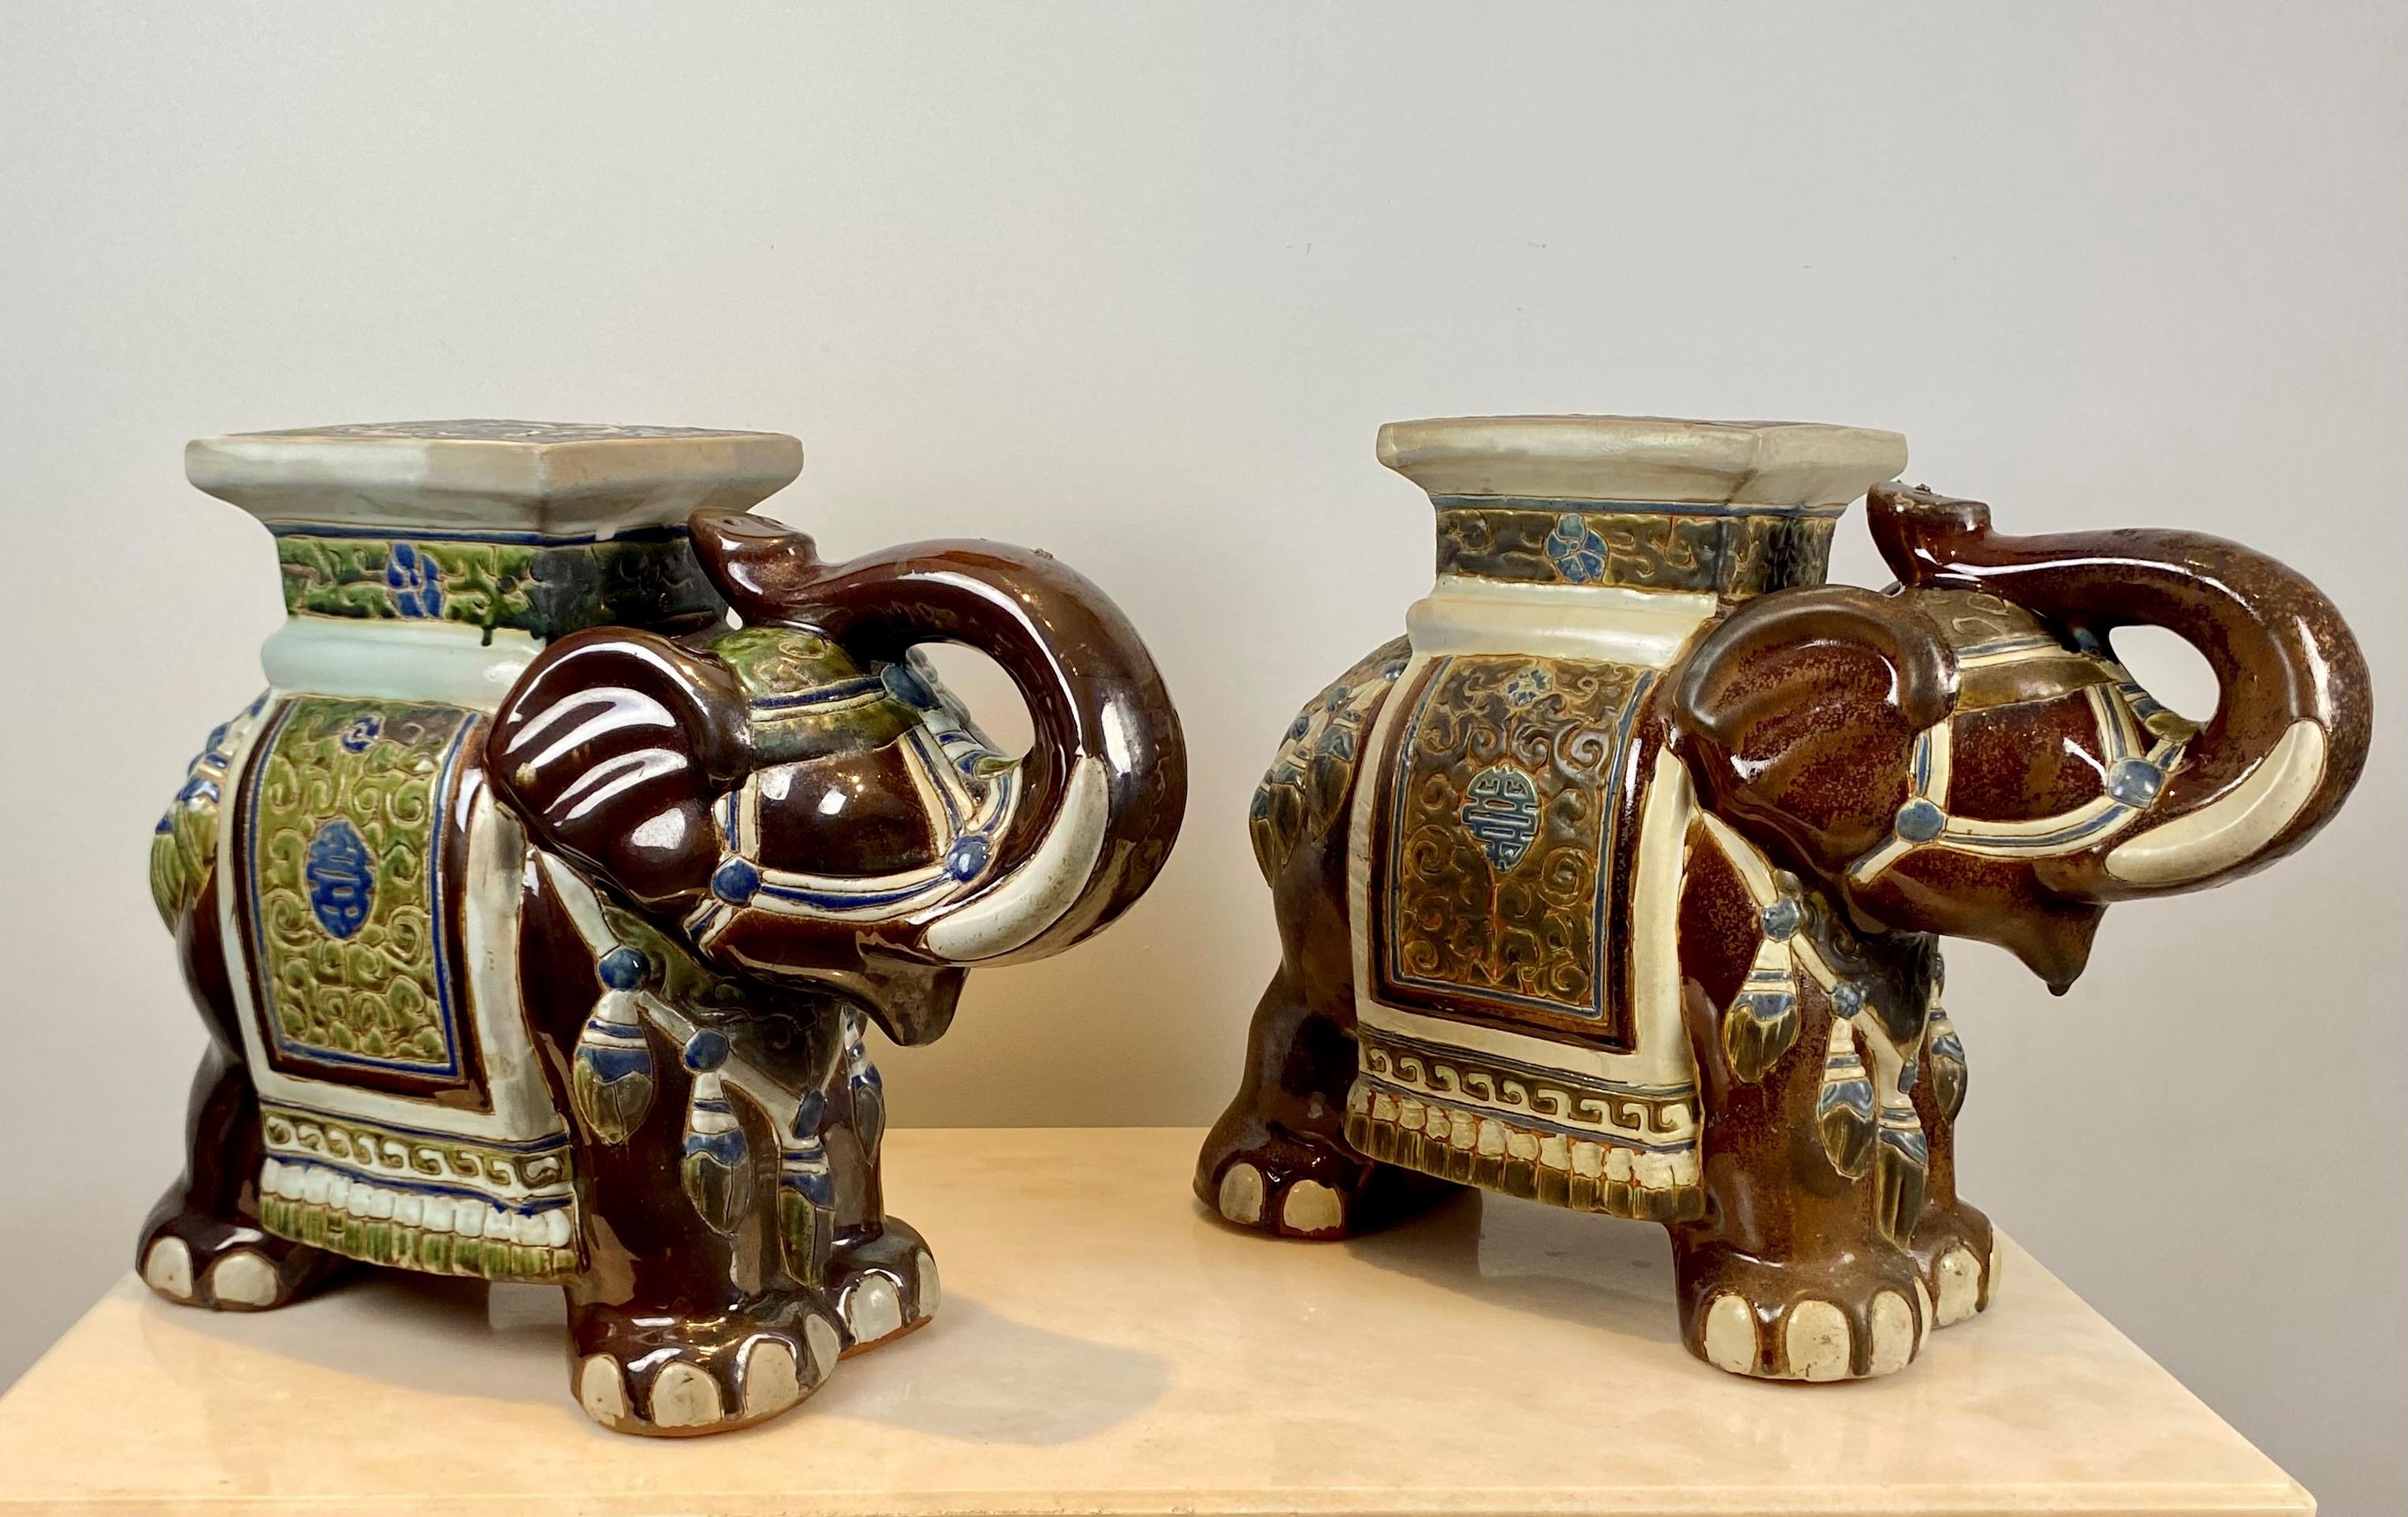 Pair of brown glazed ceramic elephants, garden stools or plant holders, China  For Sale